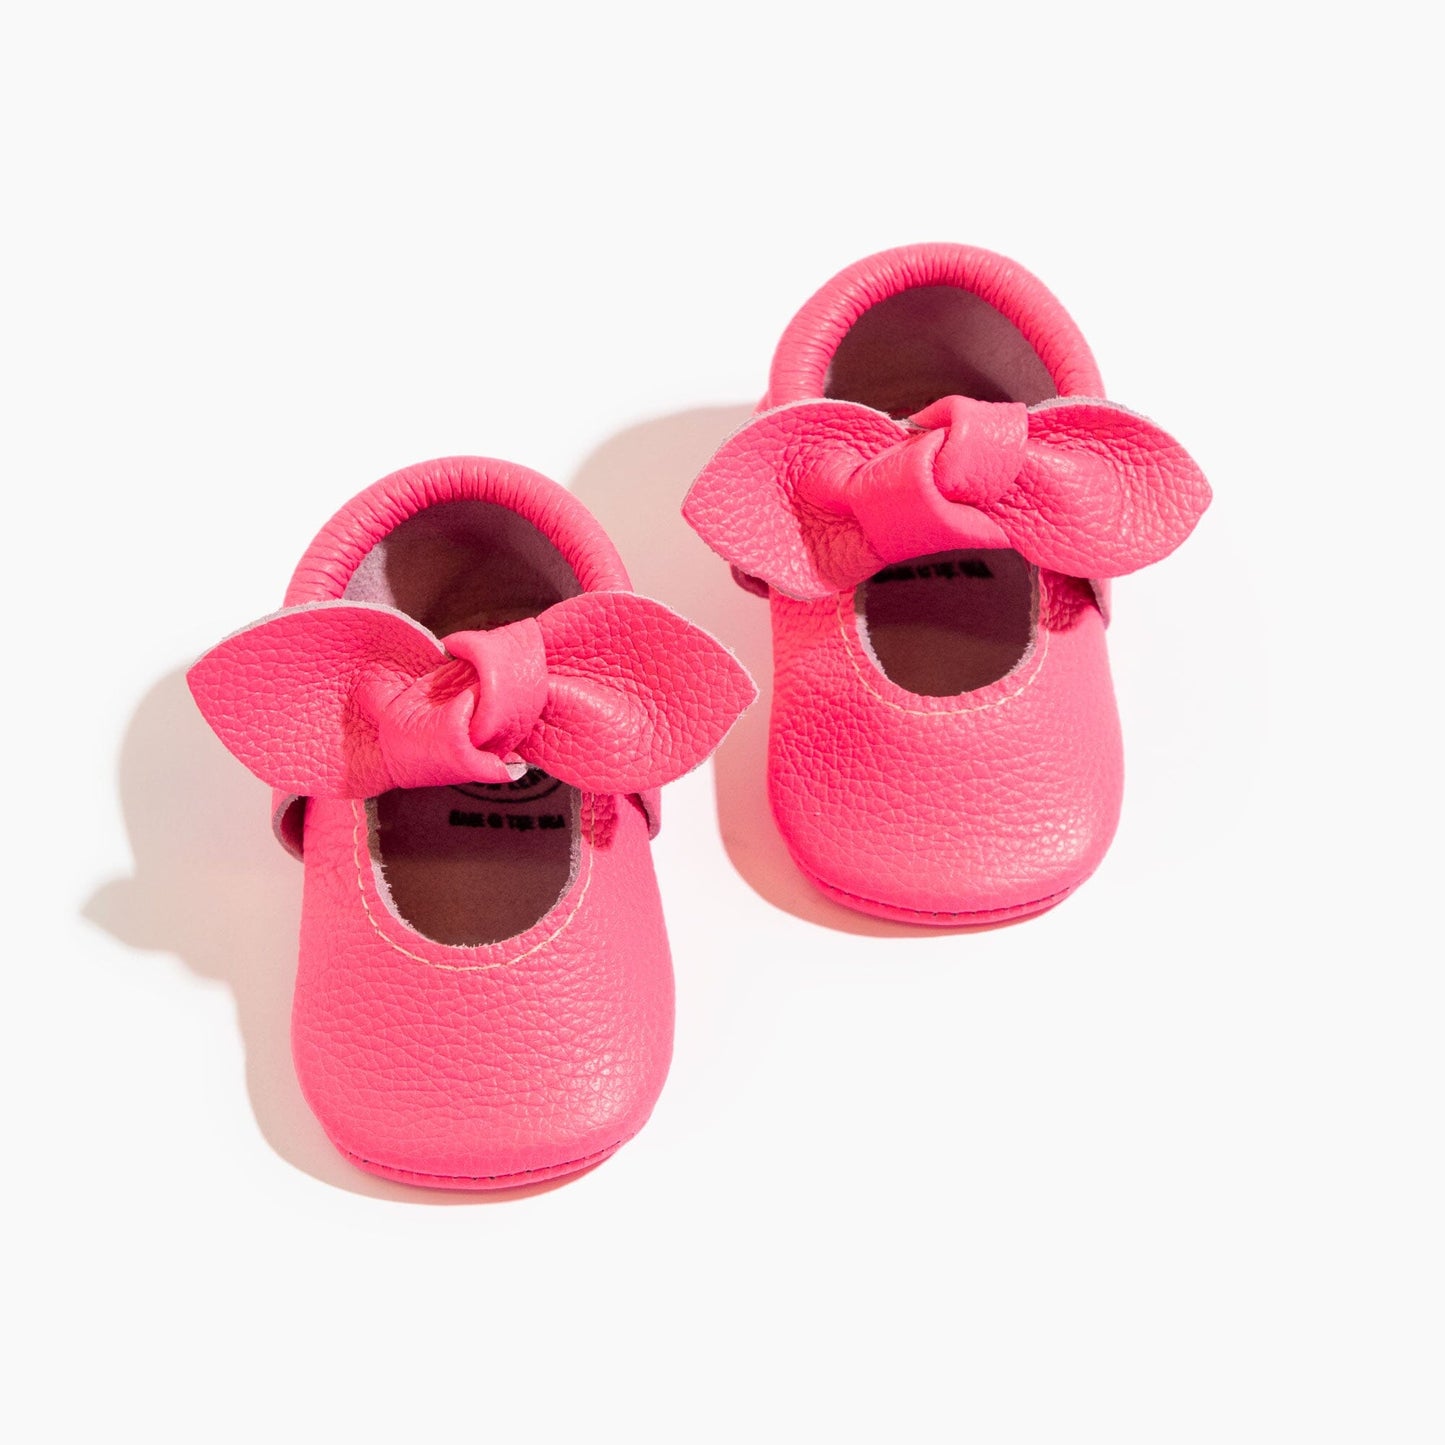 Dreamhouse Pink Knotted Baby Shoe Knotted Bow Mocc Soft Sole 